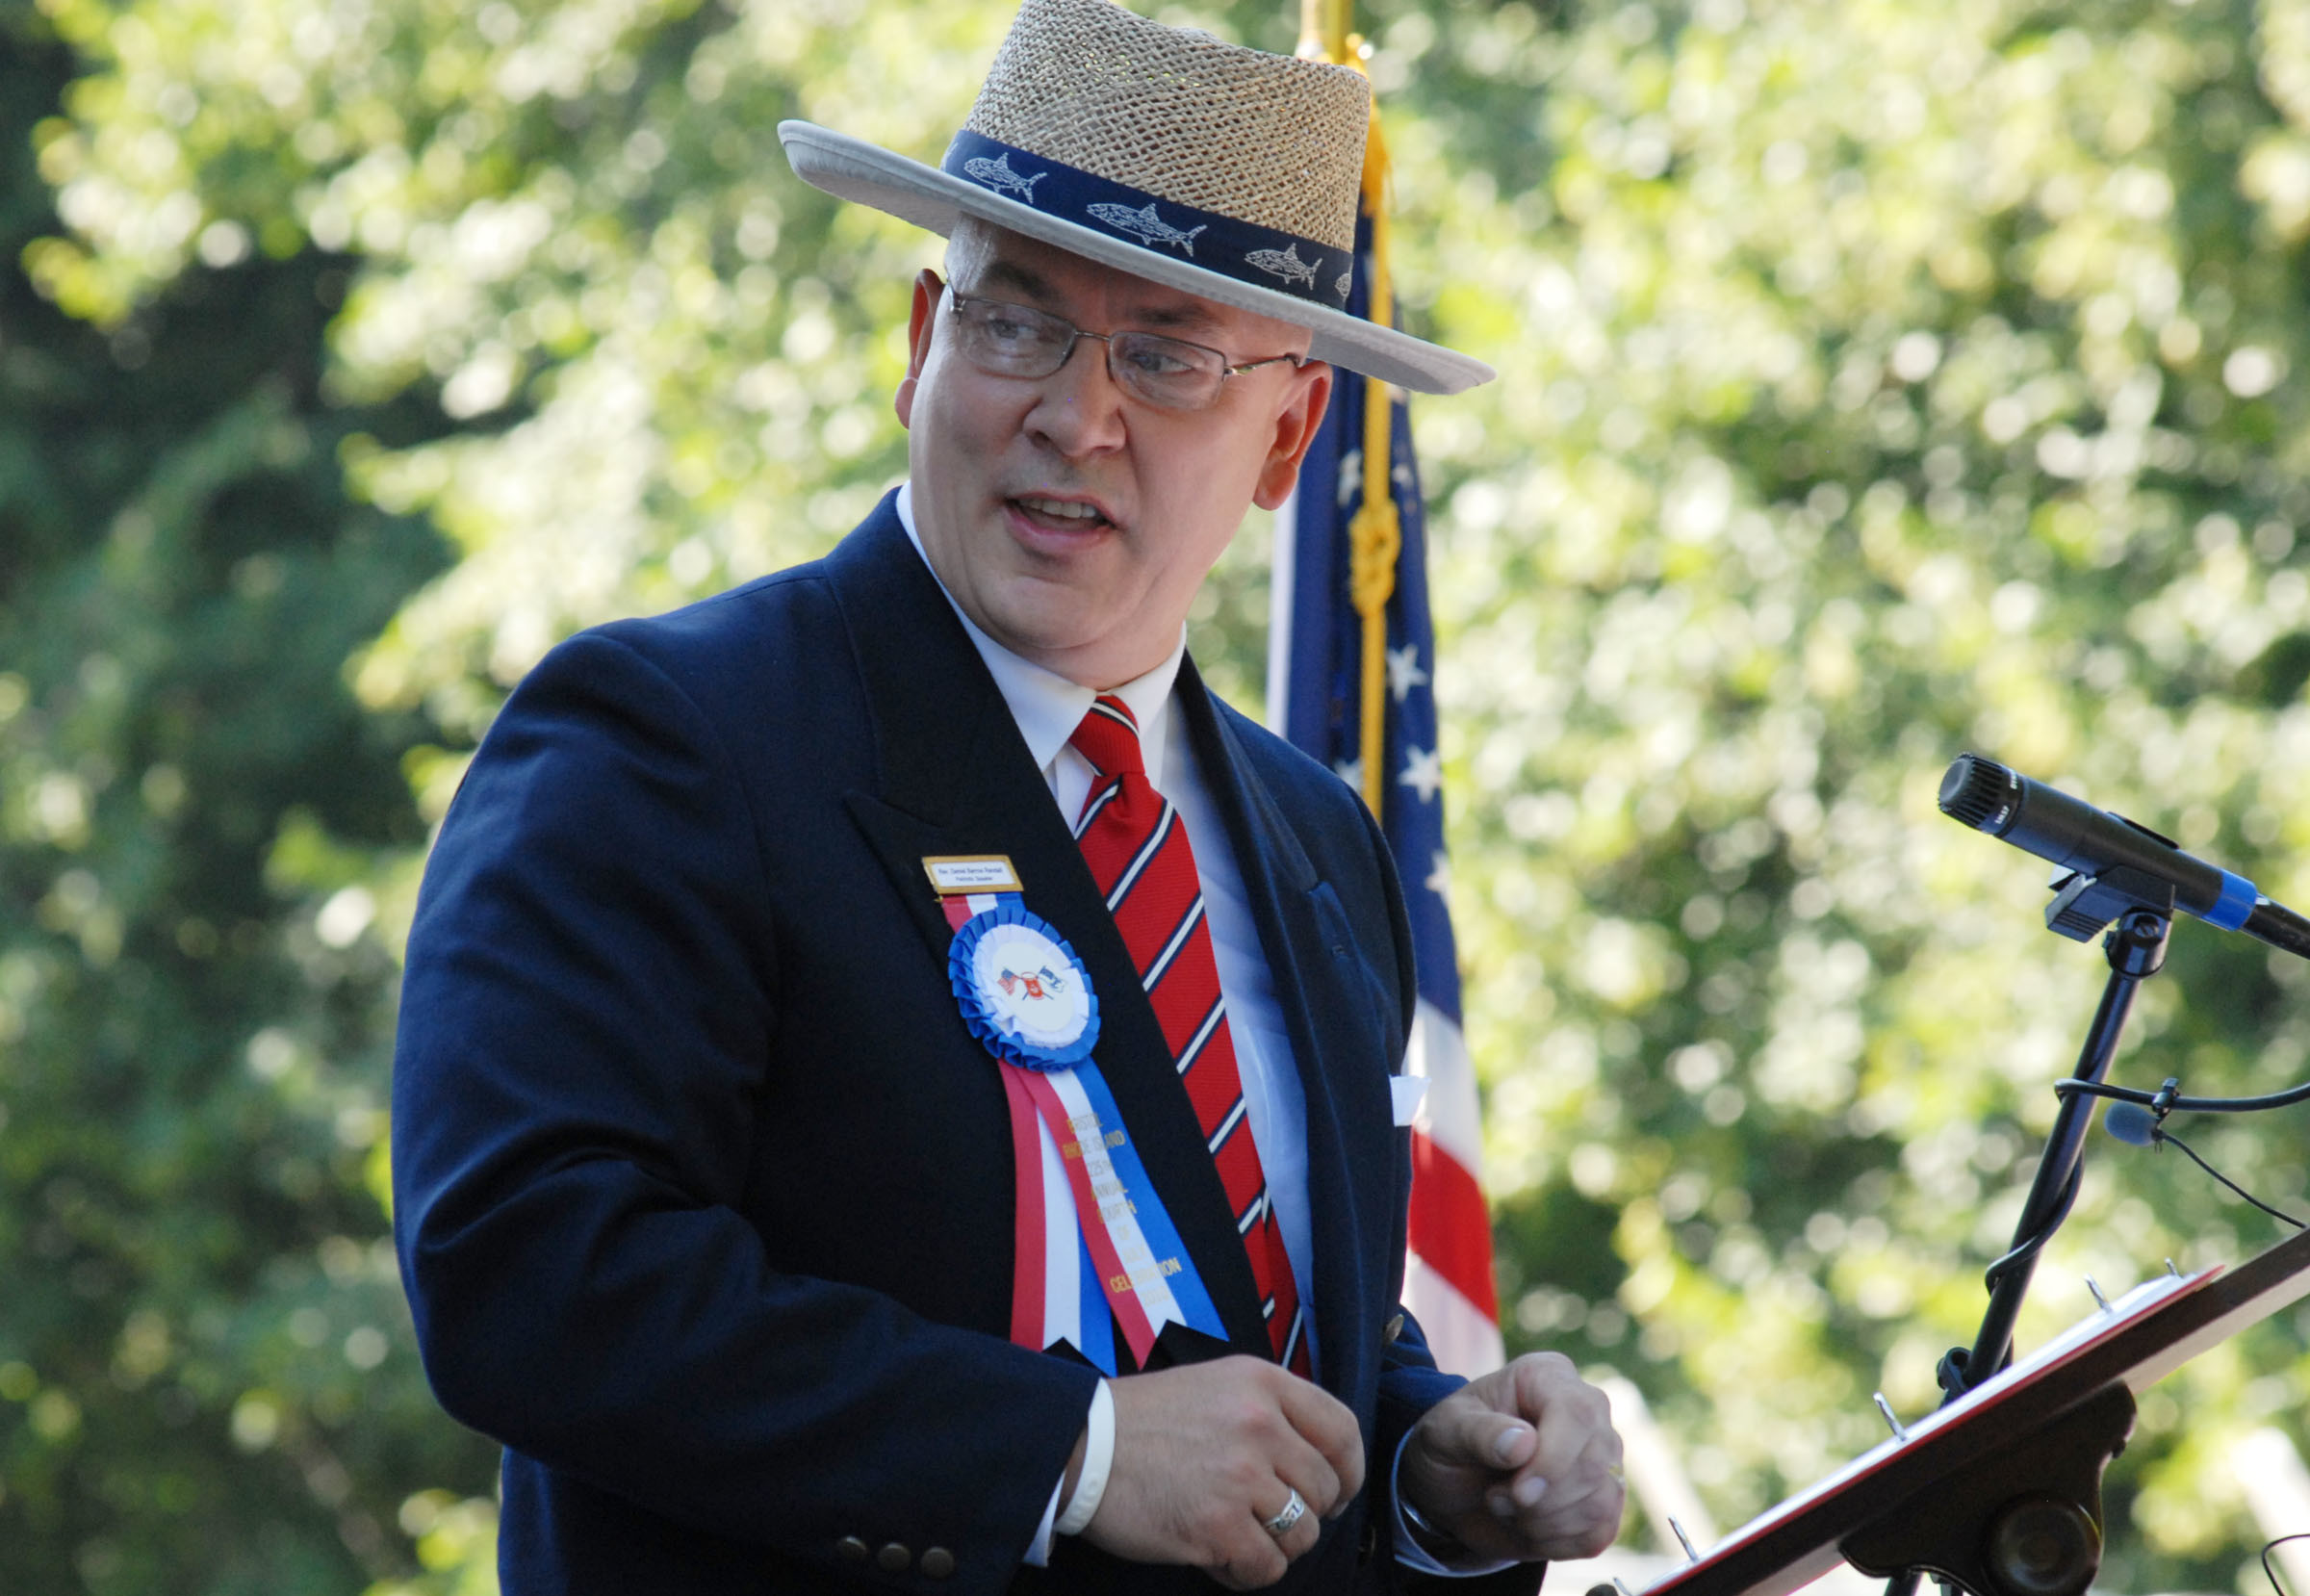 Randall was the Patriotic Speaker of the Fourth of July Parade in 2010.